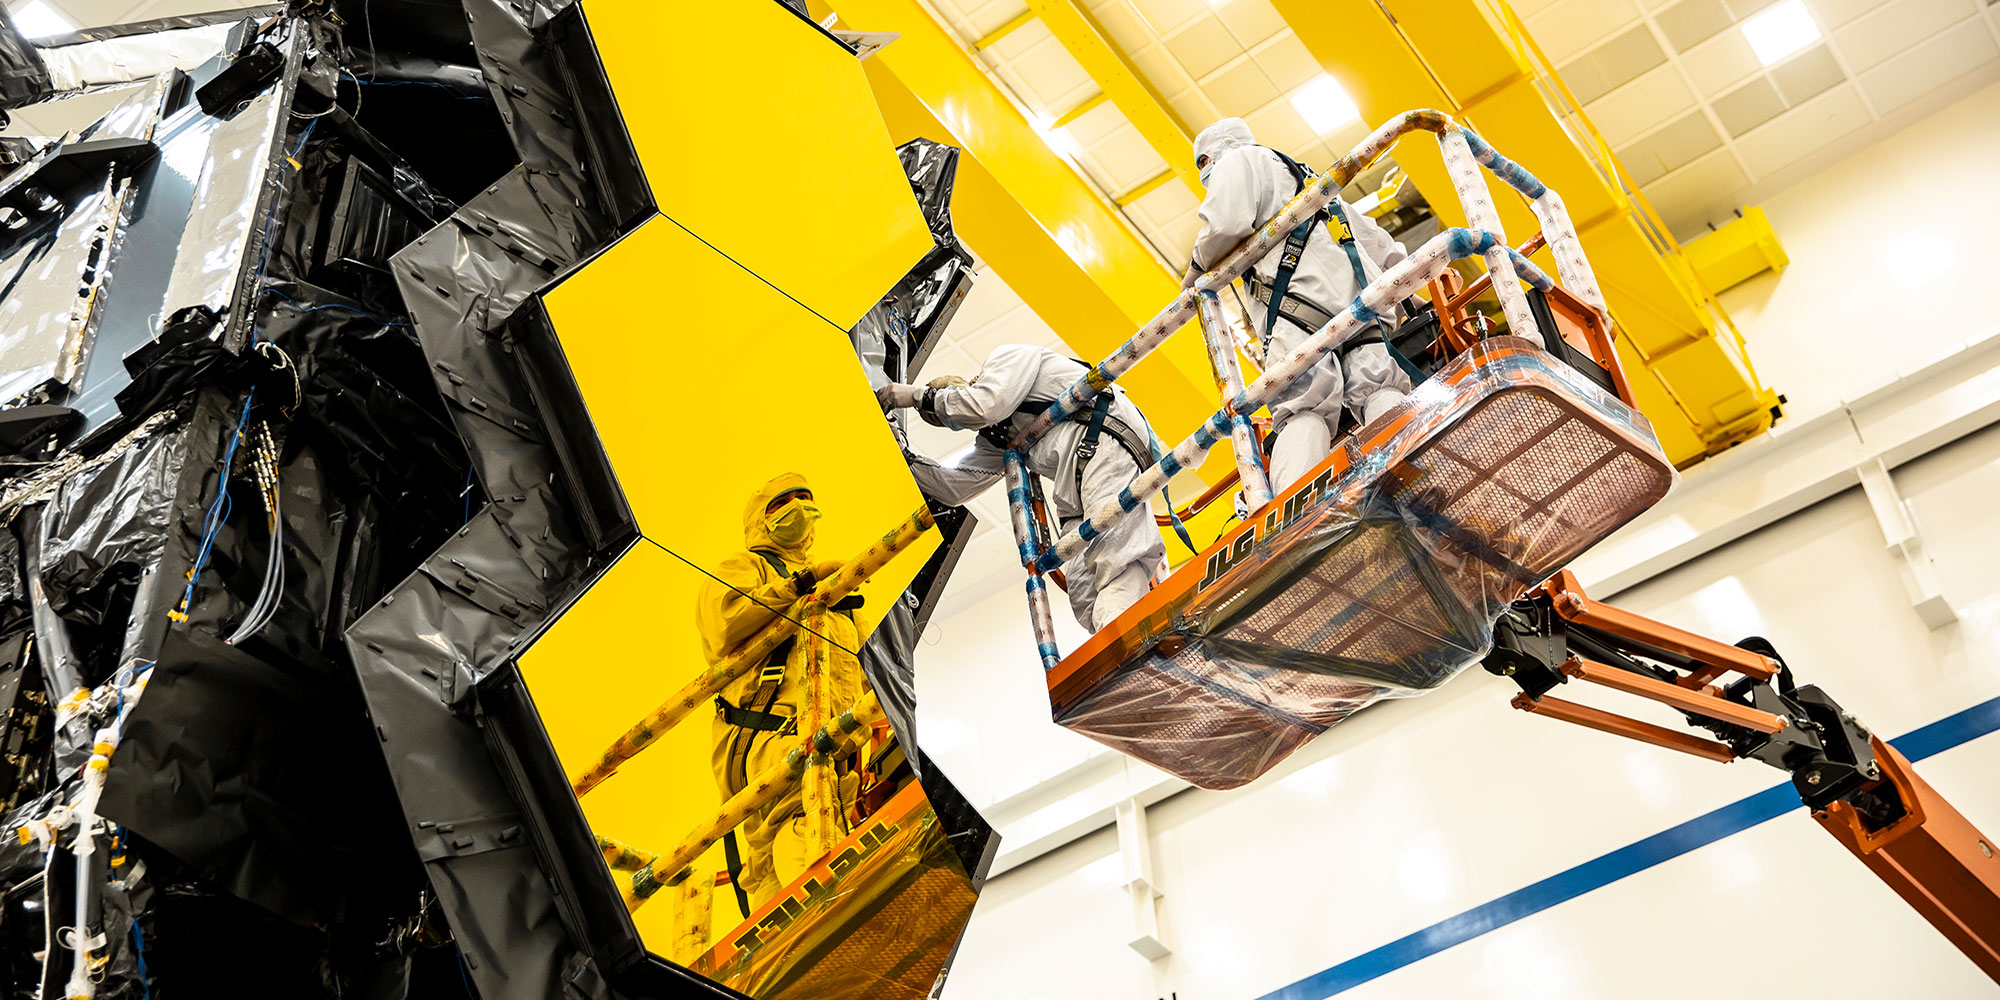 Employees working on the James Webb Space Telescope